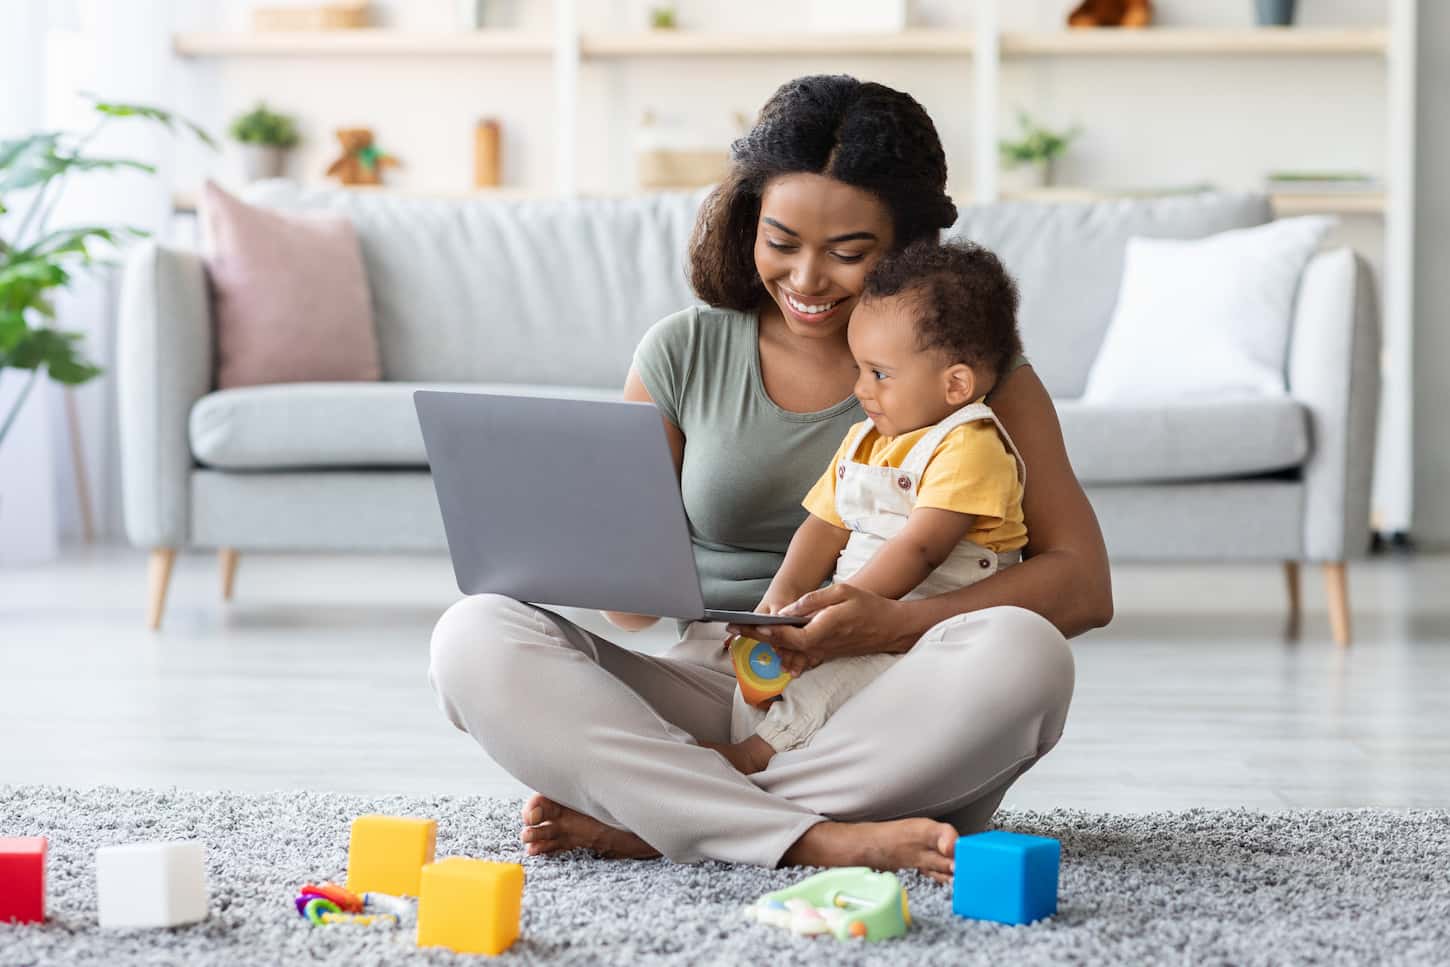 An image of a Young Mom Showing Development Videos On a Laptop To Her Infant Baby At Home, a Happy African American Mother Relaxing With a Little Toddler Child On the Floor In the Living Room, Watching Cartoons Online.